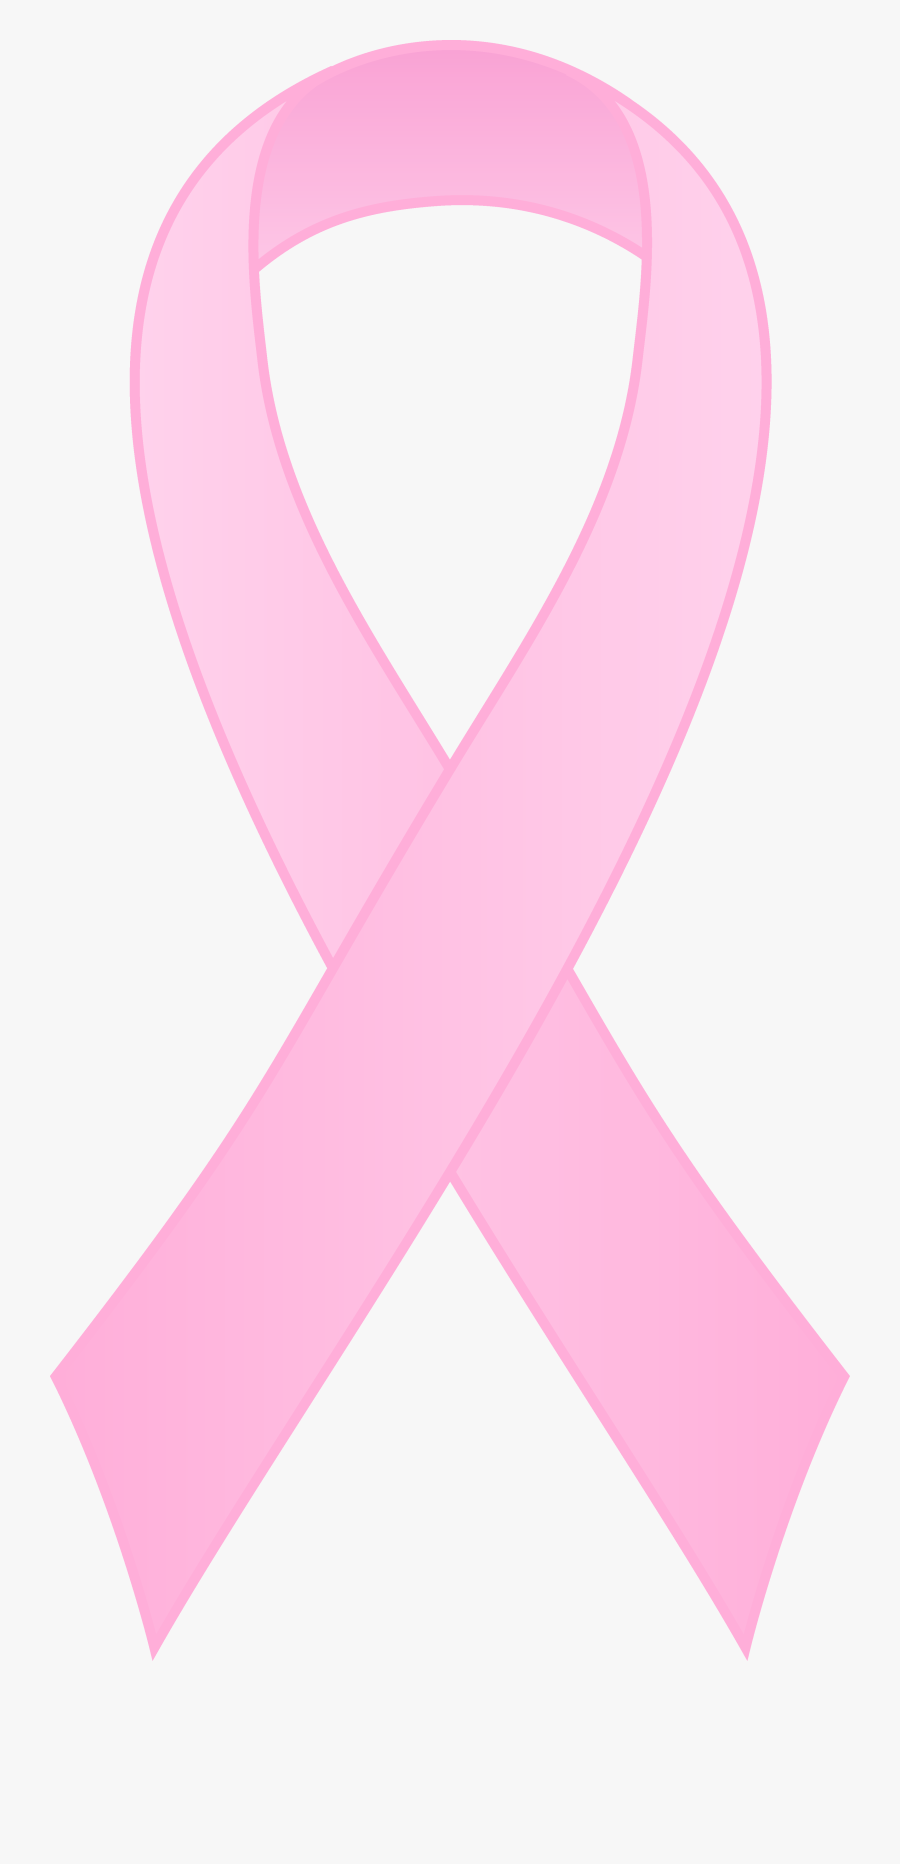 Breast Cancer Awareness Pink Ribbon Free Clip Art - Breast Cancer Awareness Ribbon Black Background, Transparent Clipart